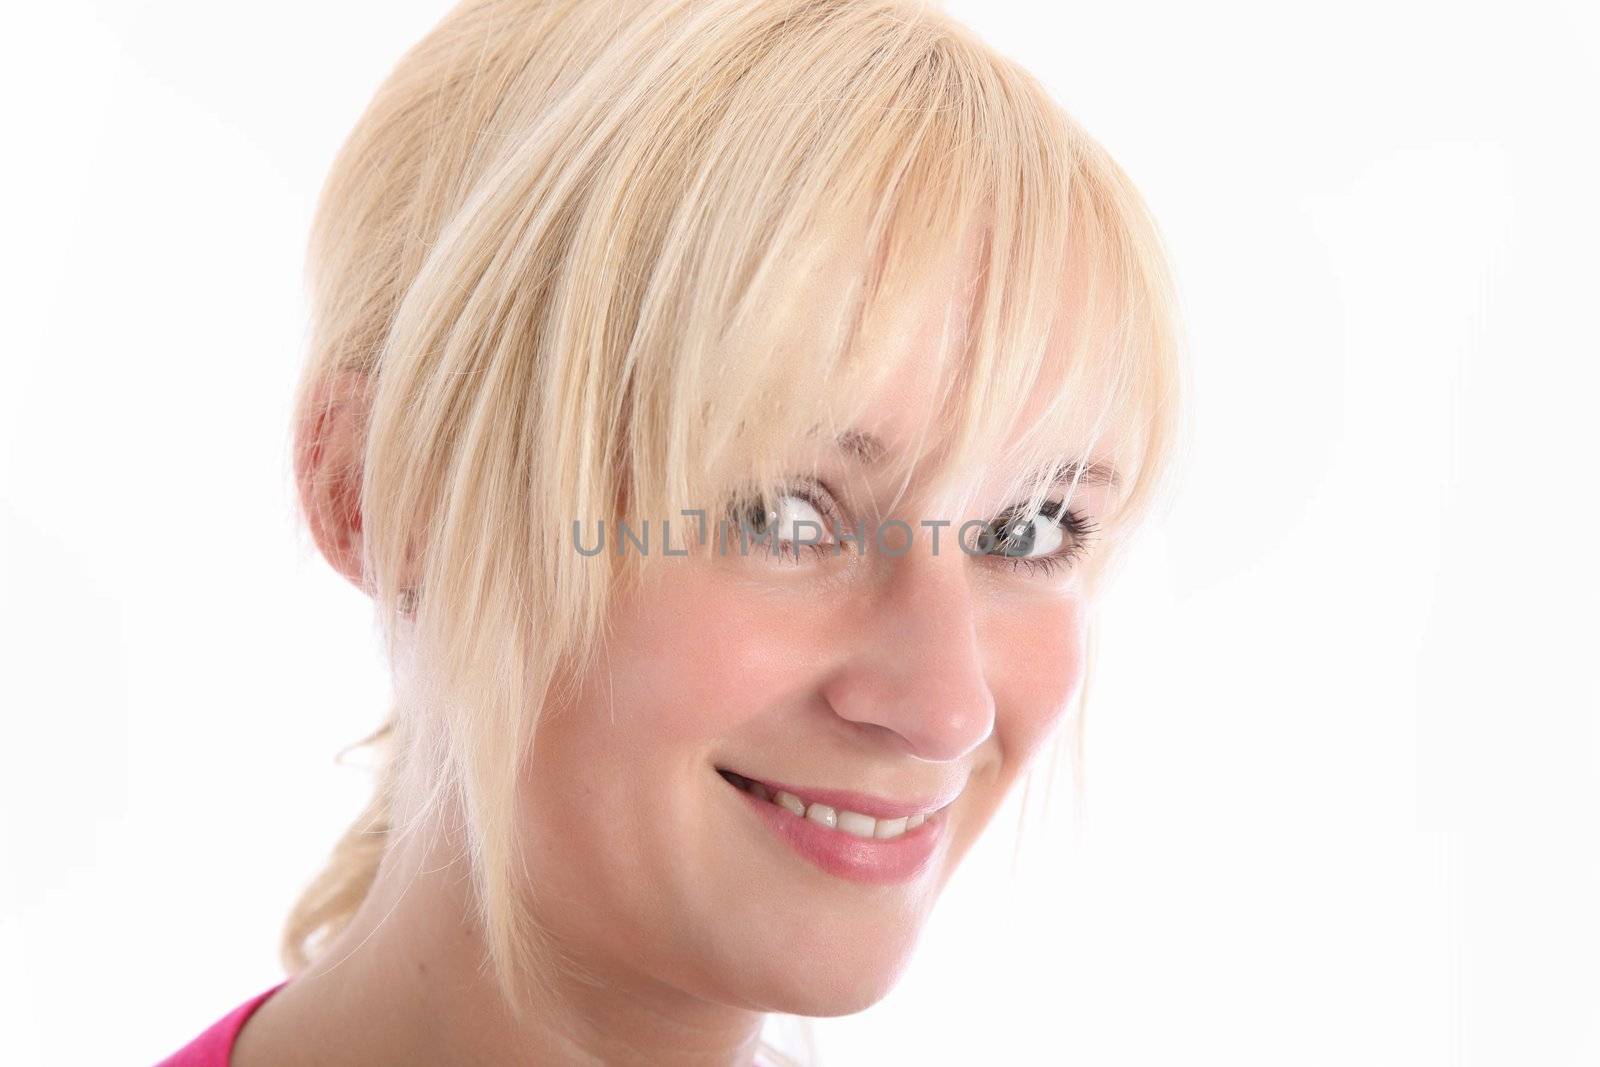 Close up portrait of smiling blonde woman with blue eyes on white background